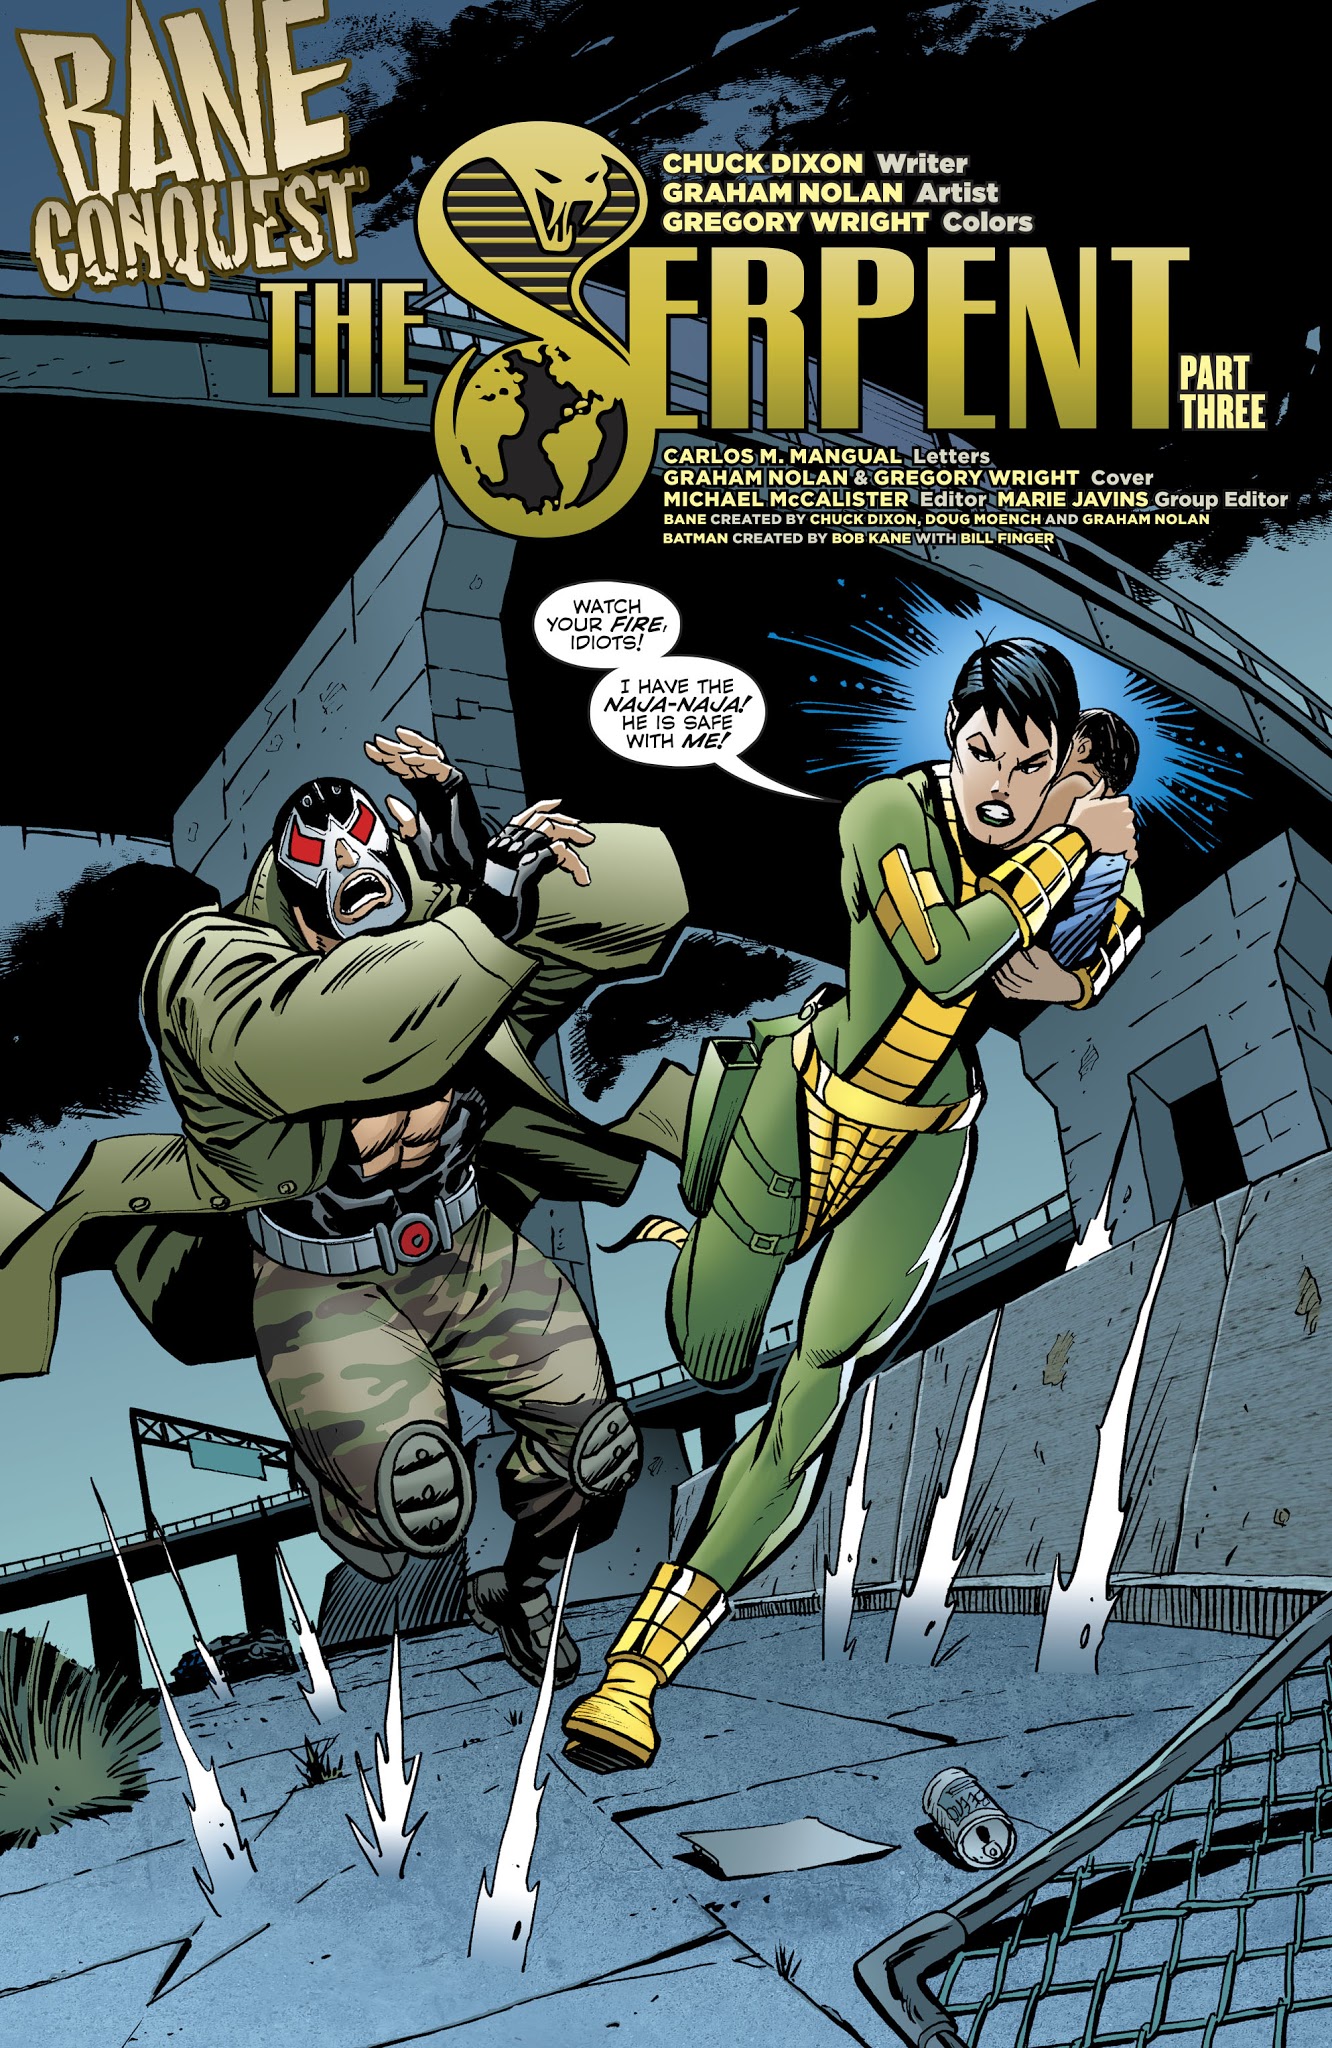 Read online Bane: Conquest comic -  Issue #8 - 3